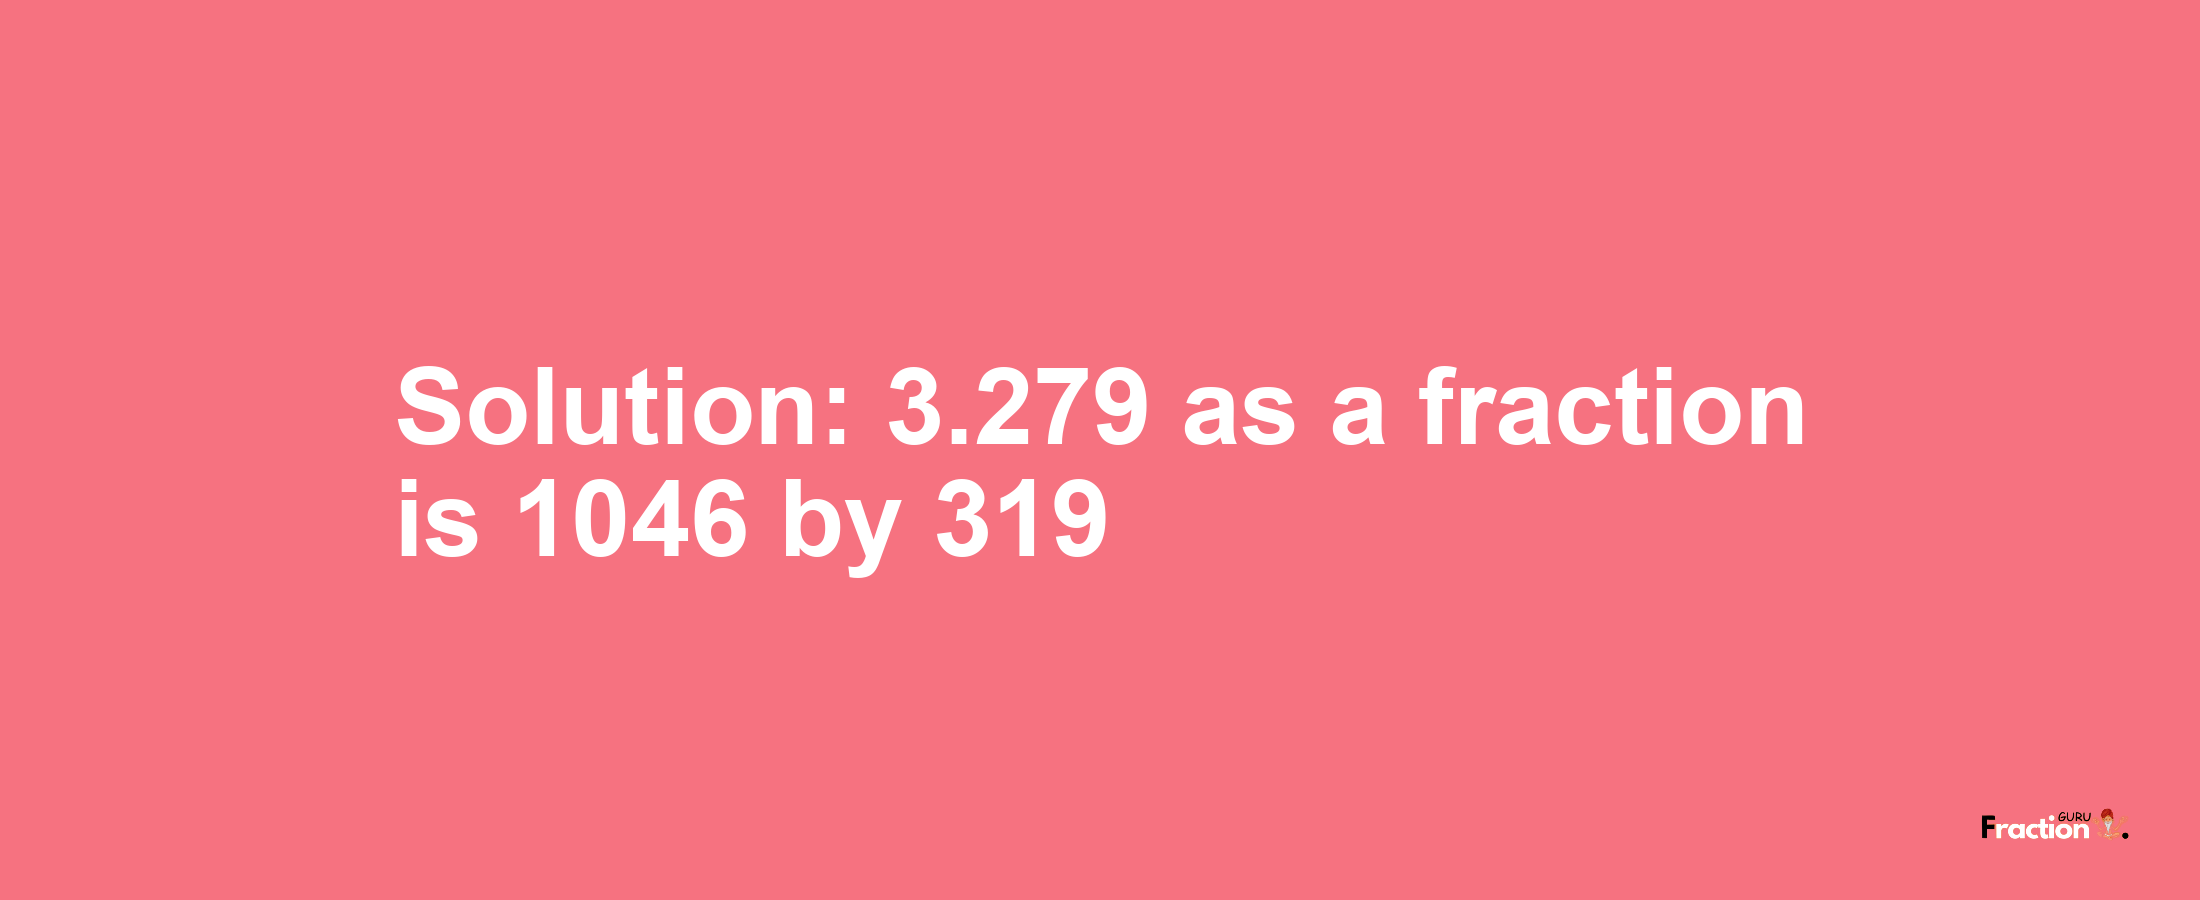 Solution:3.279 as a fraction is 1046/319